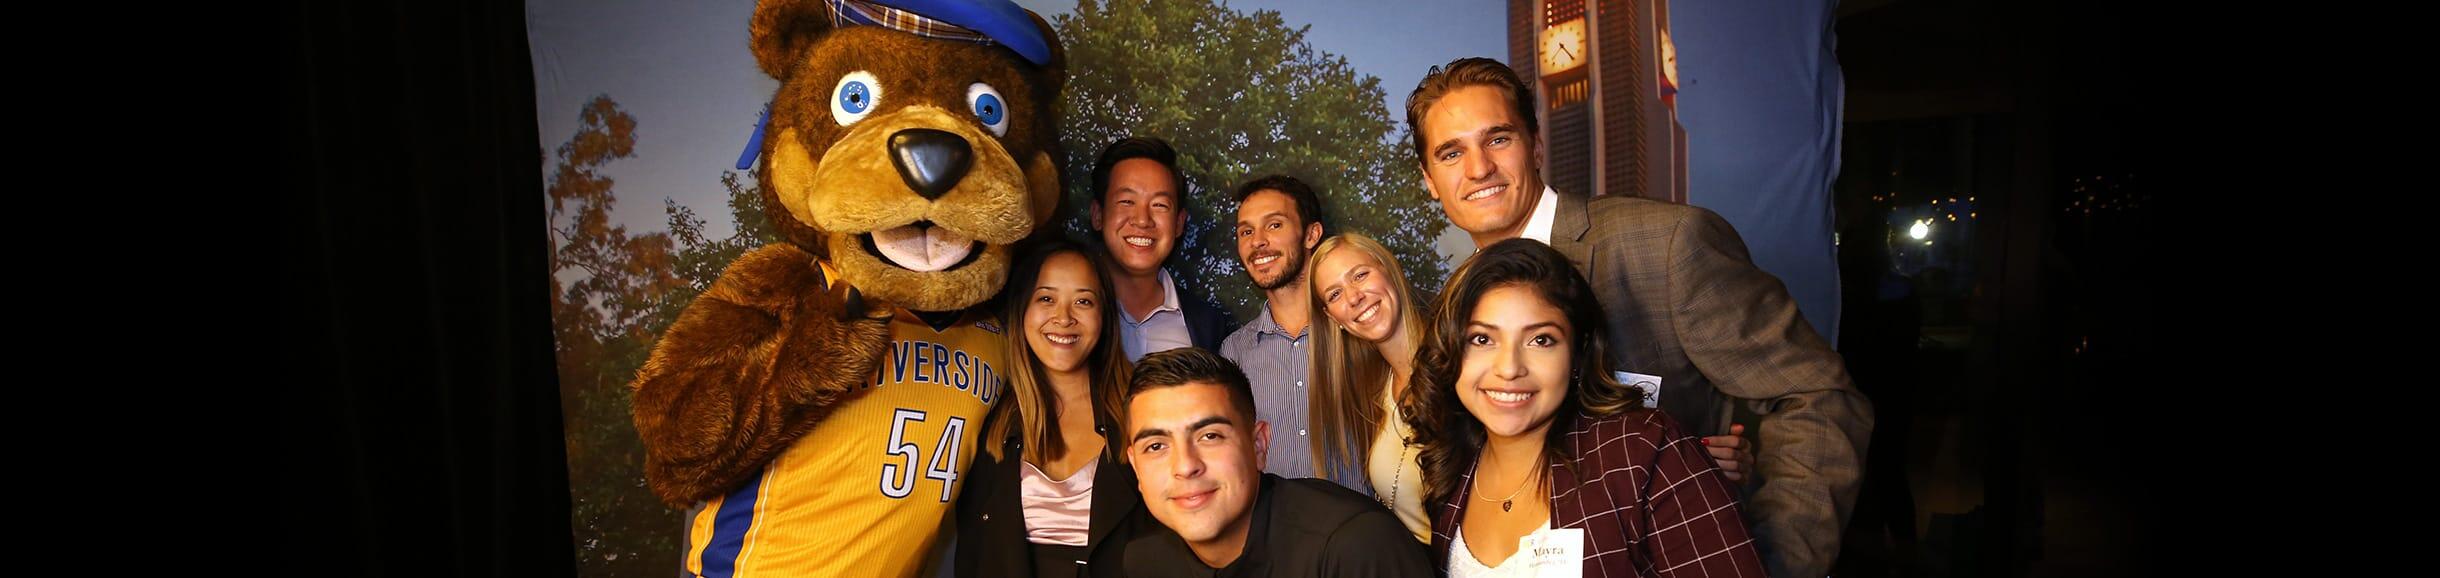 Group of UCR alumnus with Scotty at an Alumni event